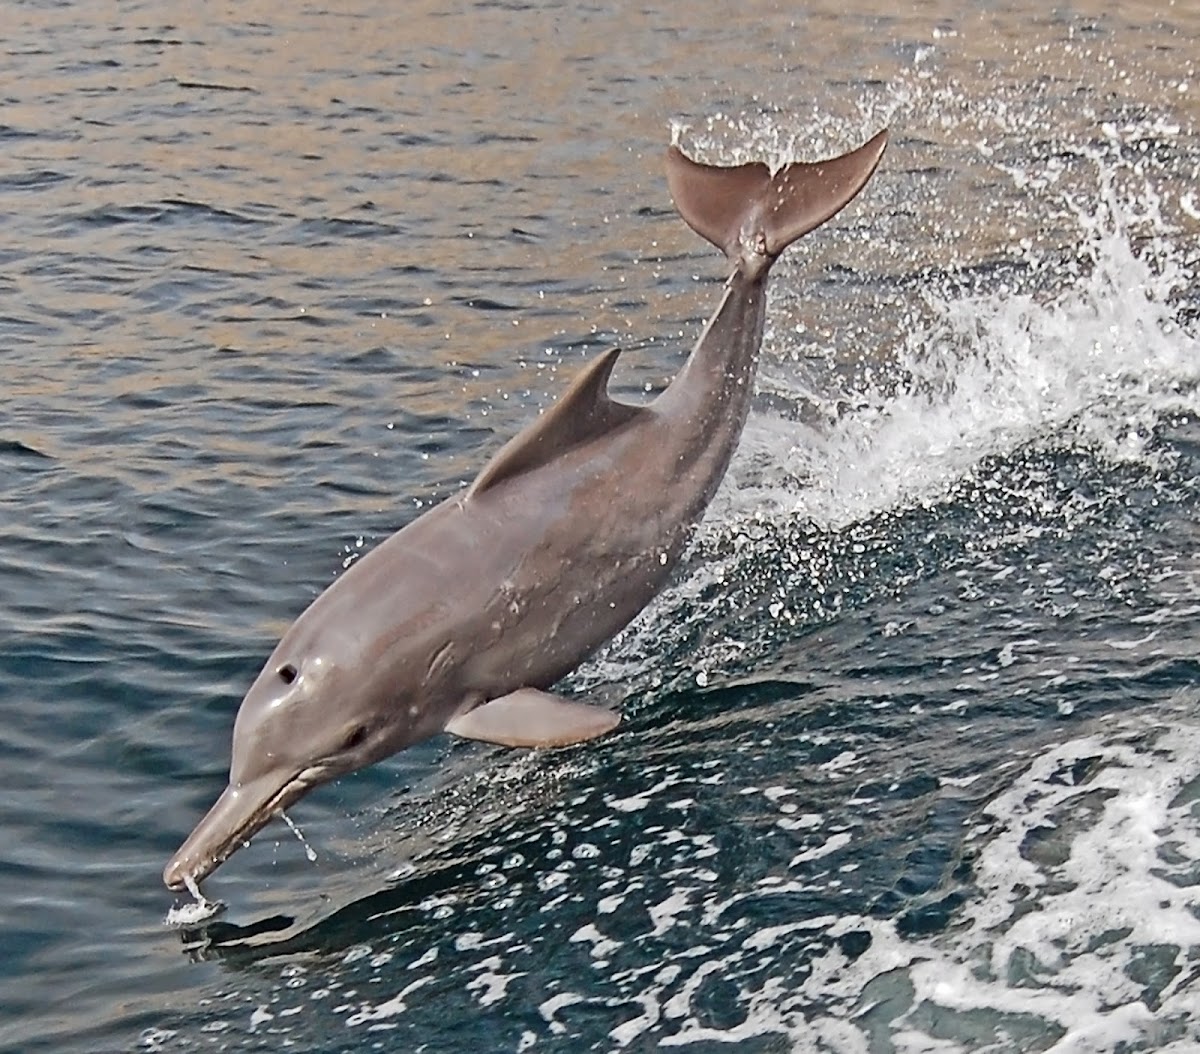 Indian humpback dolphin